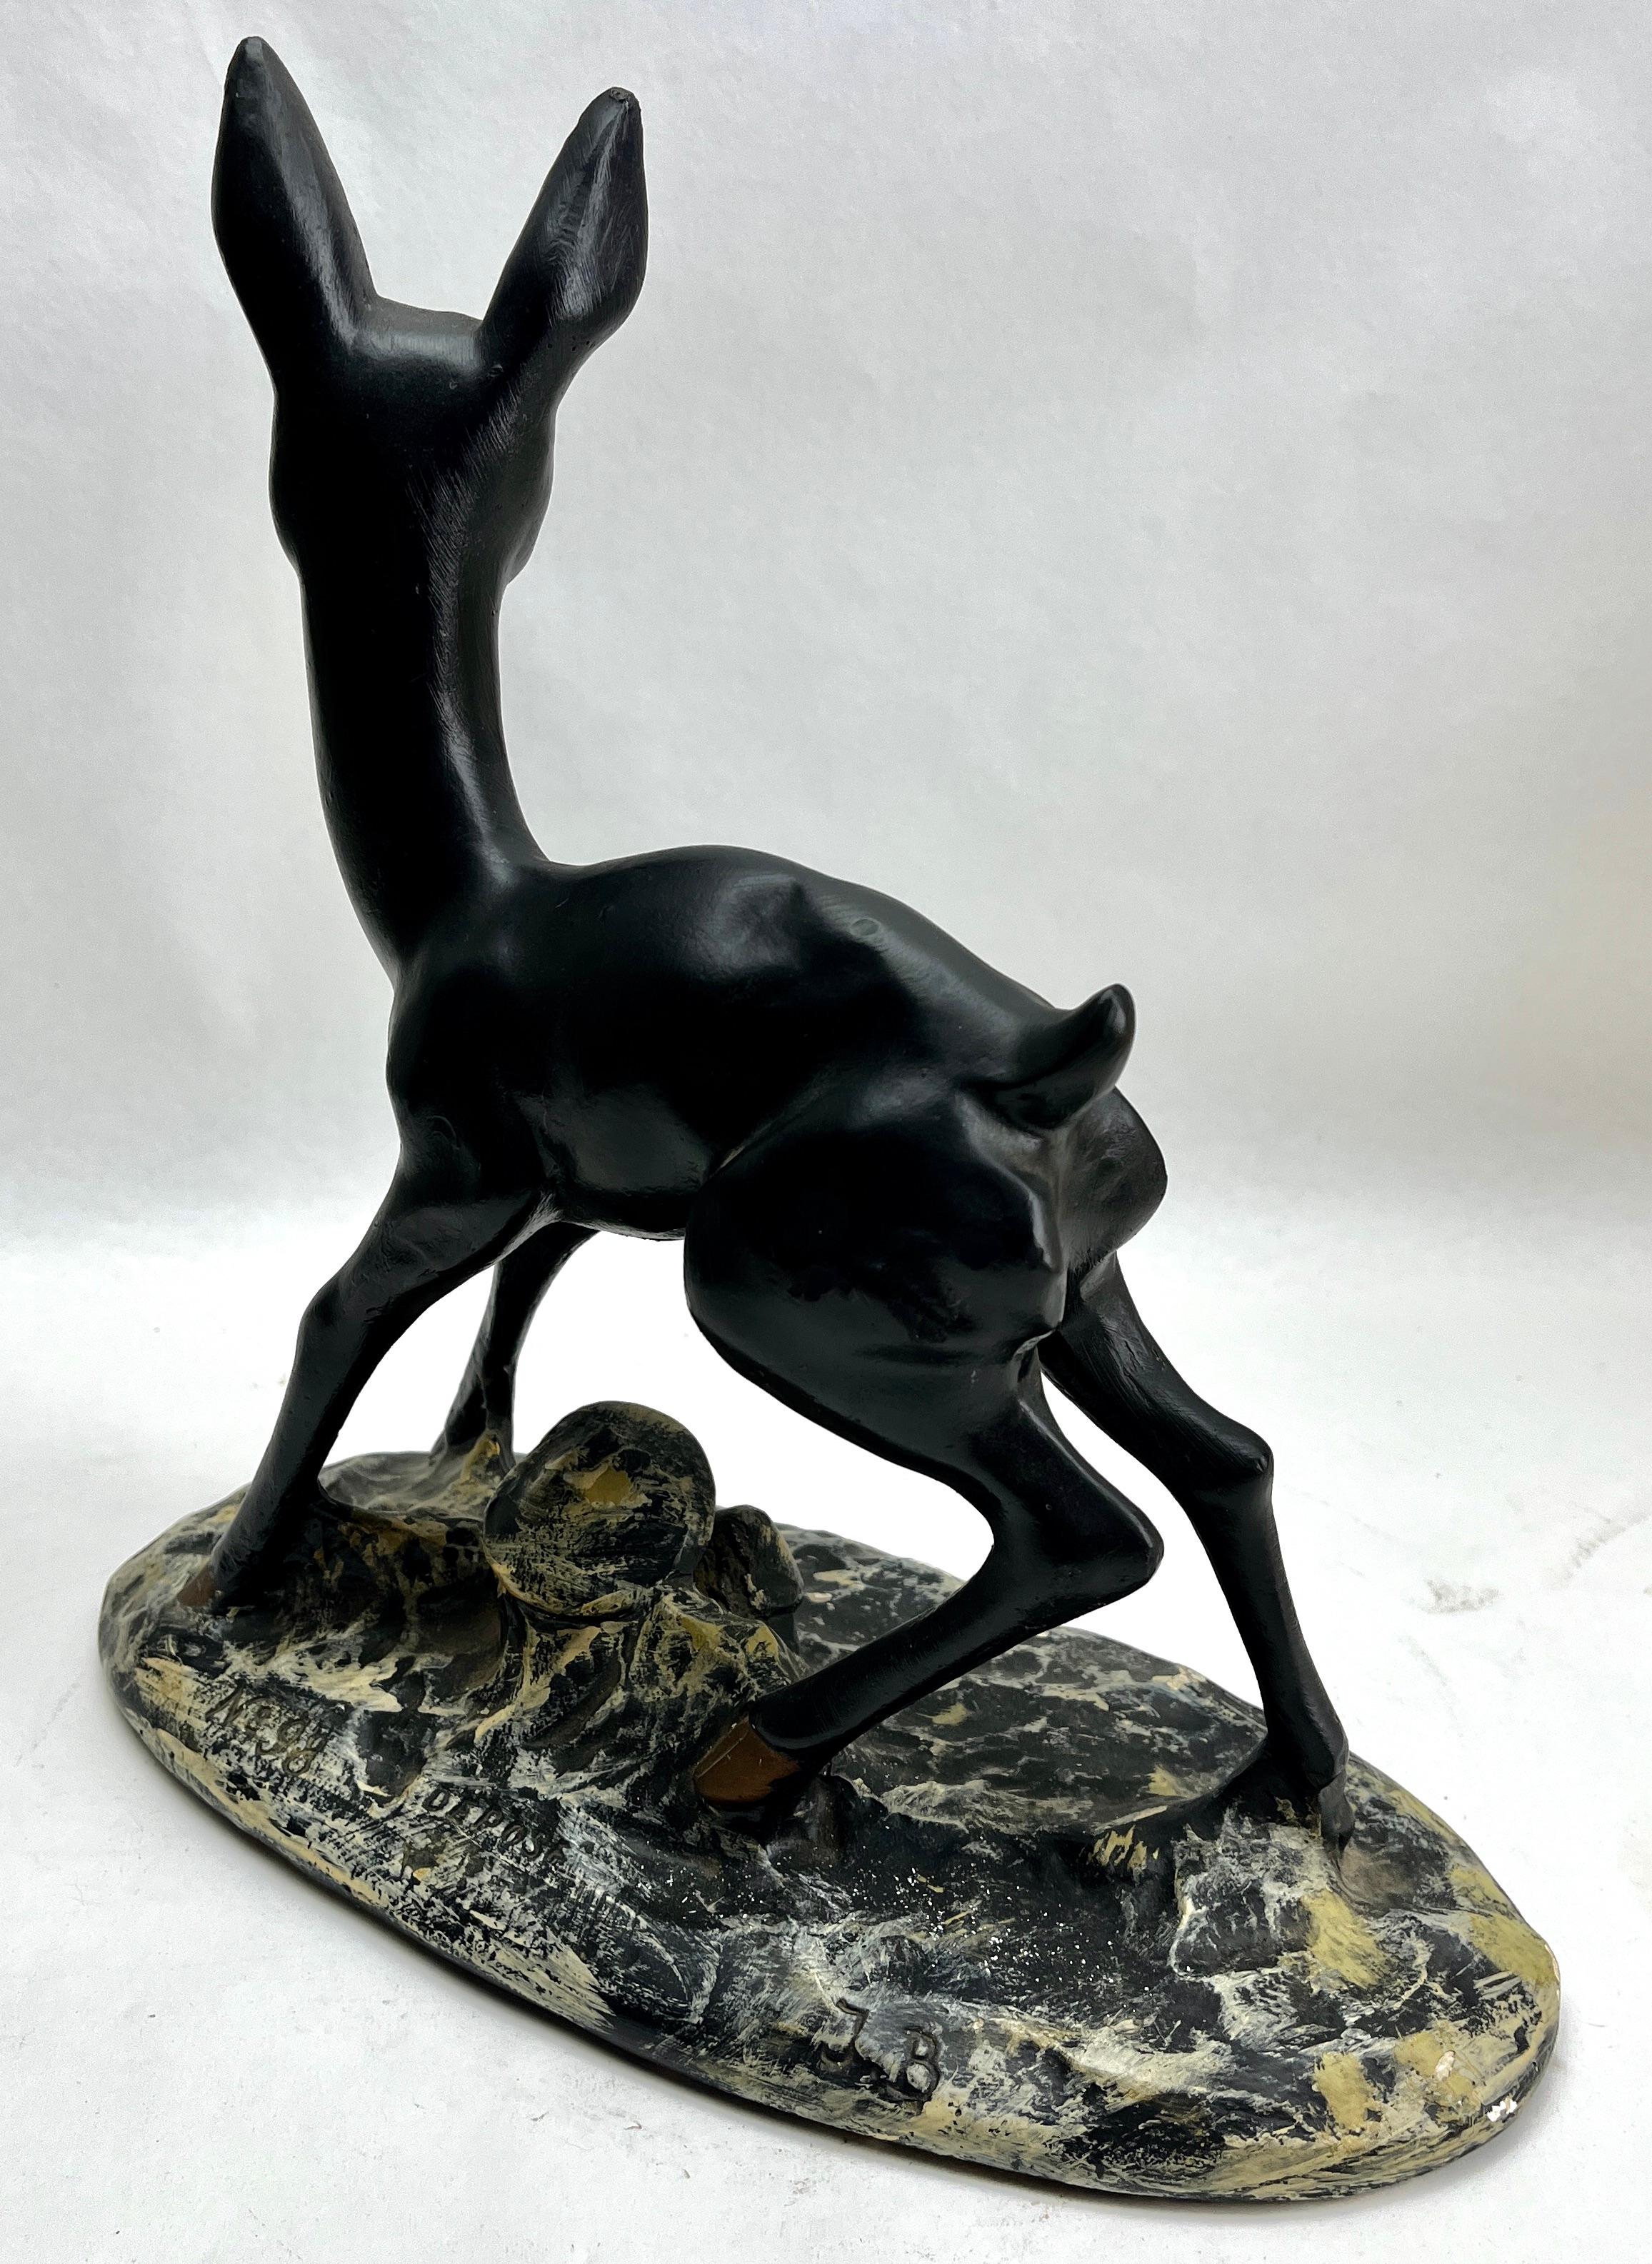 Stylish Plaster Handpainted Bambi Sculpture, Signed: Depose No 98 J.B In Good Condition For Sale In Verviers, BE